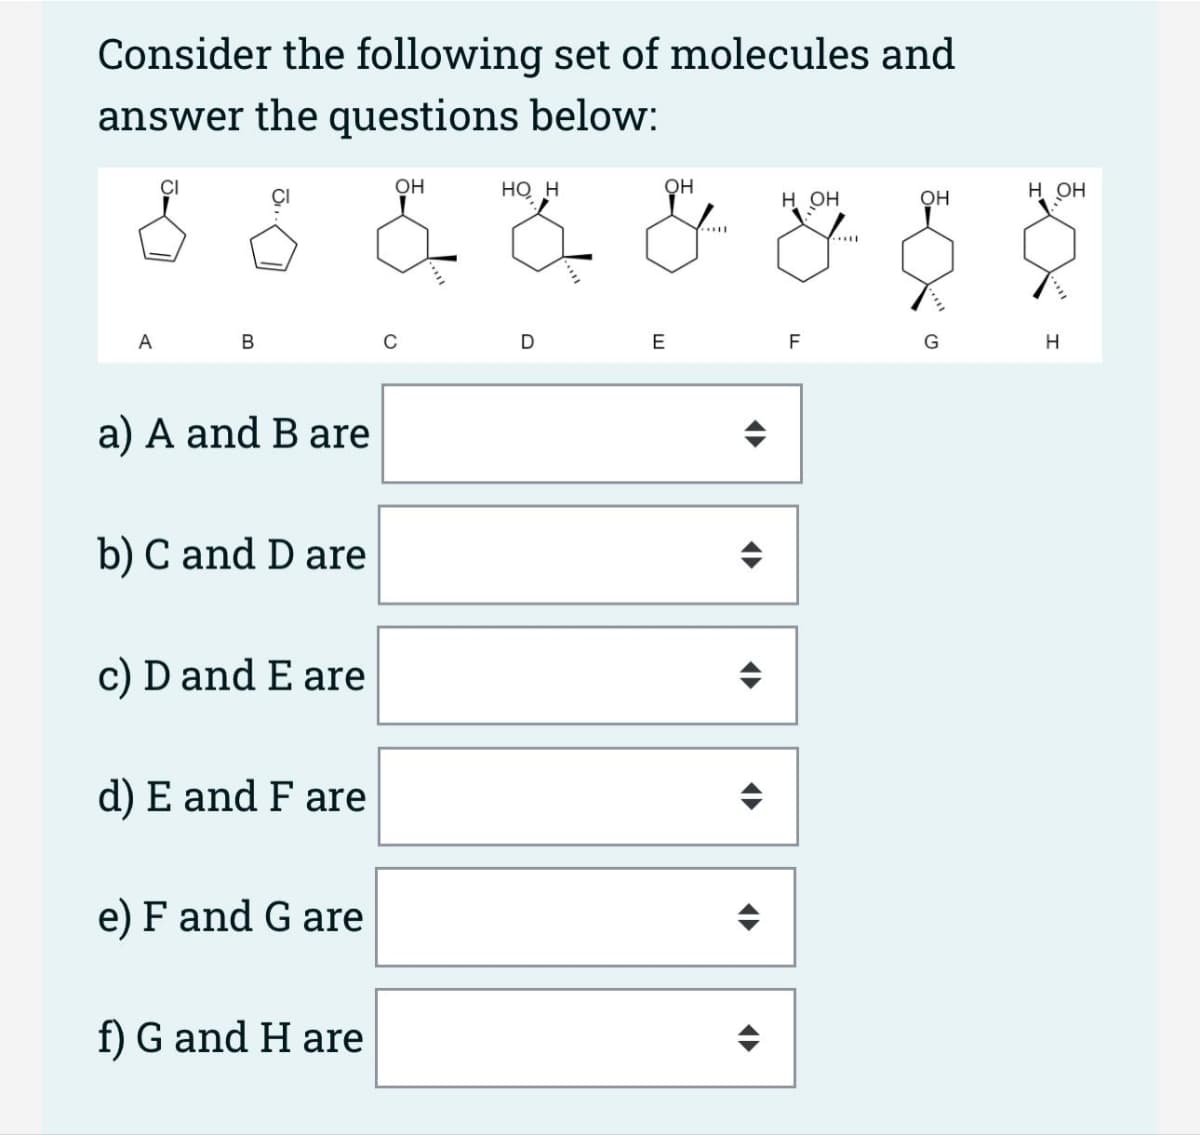 Consider the following set of molecules and
answer the questions below:
OH
HO H
OH
H OH
8 8 & 7 & 8
Il
A
B
a) A and B are
b) C and D are
c) D and E are
d) E and F are
e) F and G are
f) G and H are
D
E
<
F
OH
G
на он
H